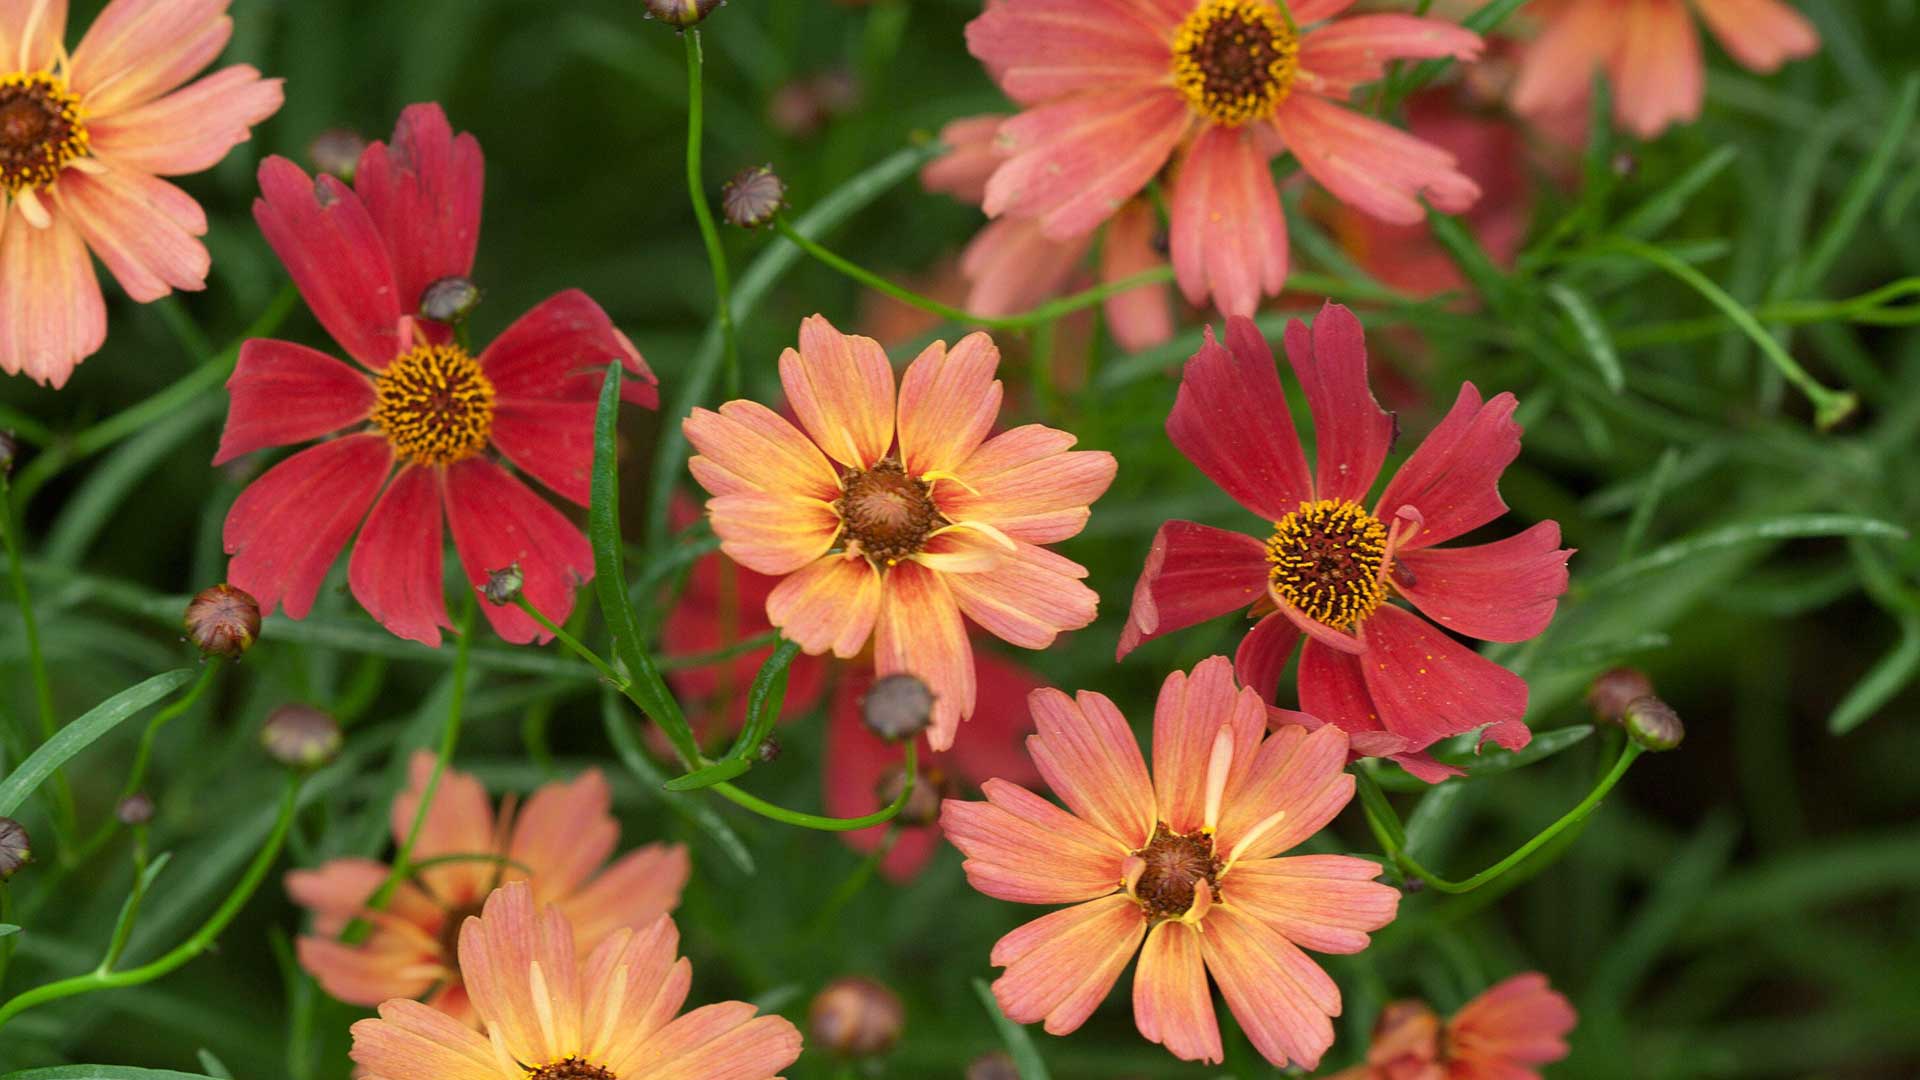 Coreopsis 'Rum Punch' flowers